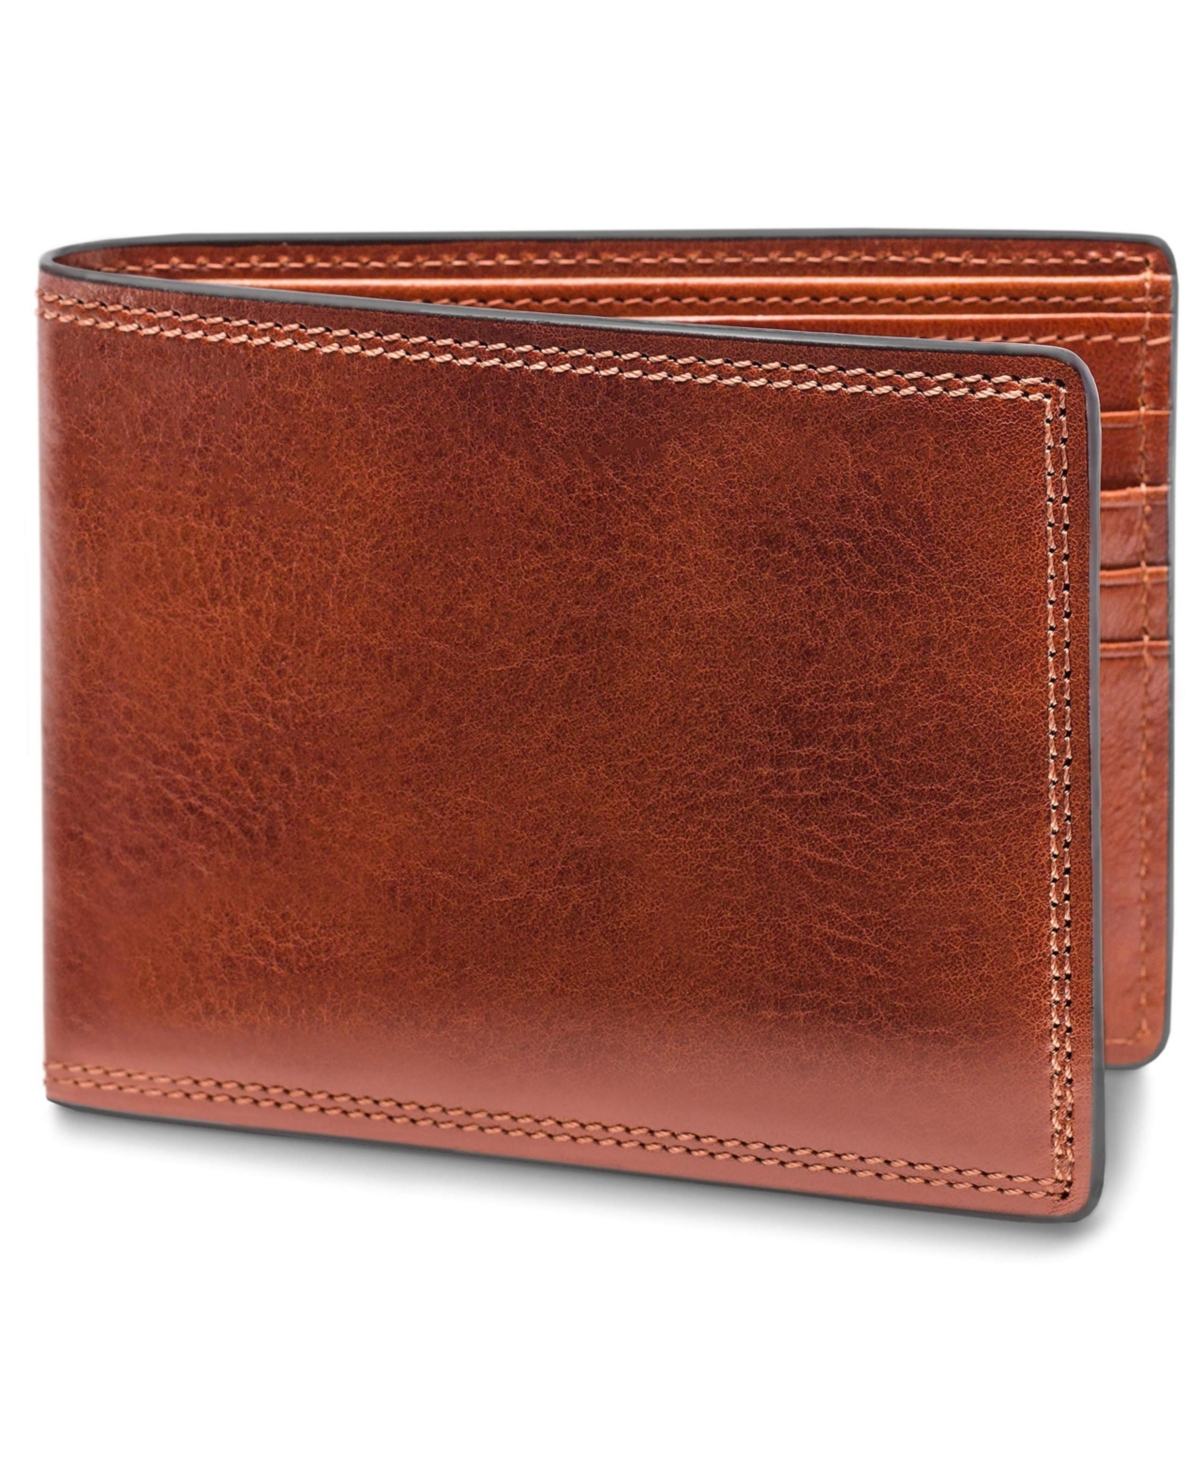 Dolce Old Leather 8 Pocket Deluxe Executive Wallet - Amber